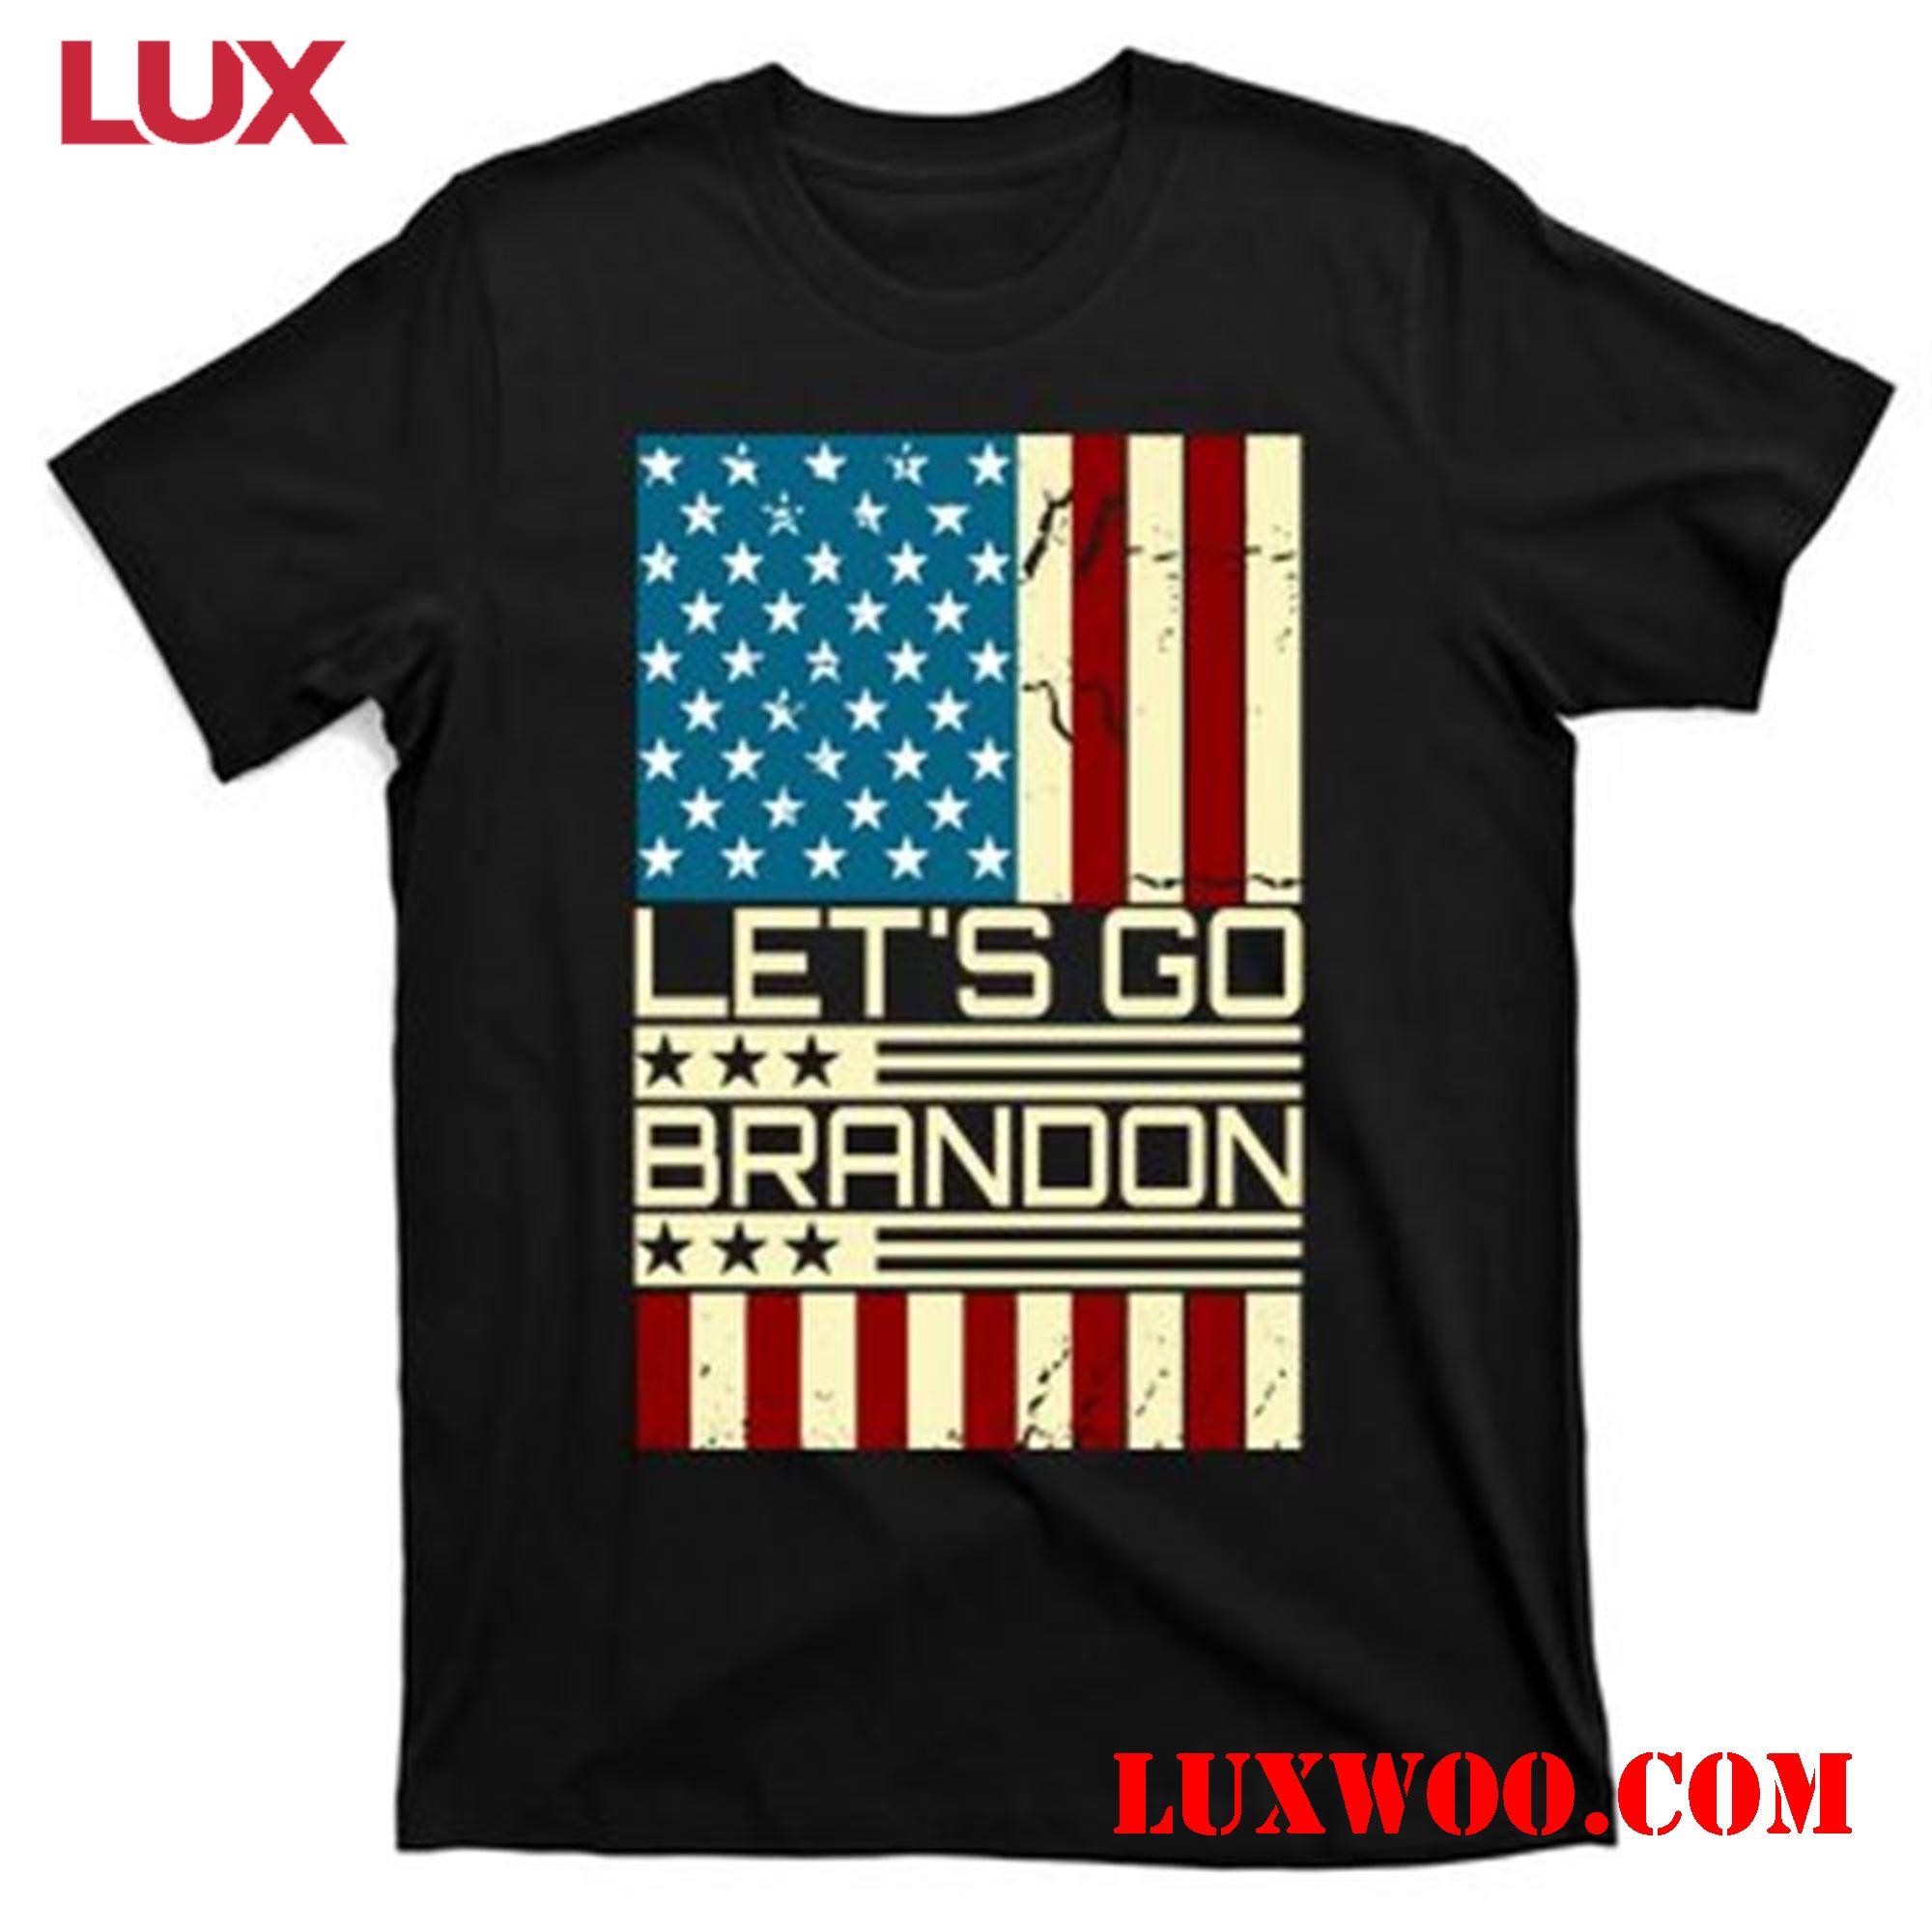 Get Your Hands On High-quality Let's Go Brandon Apparel